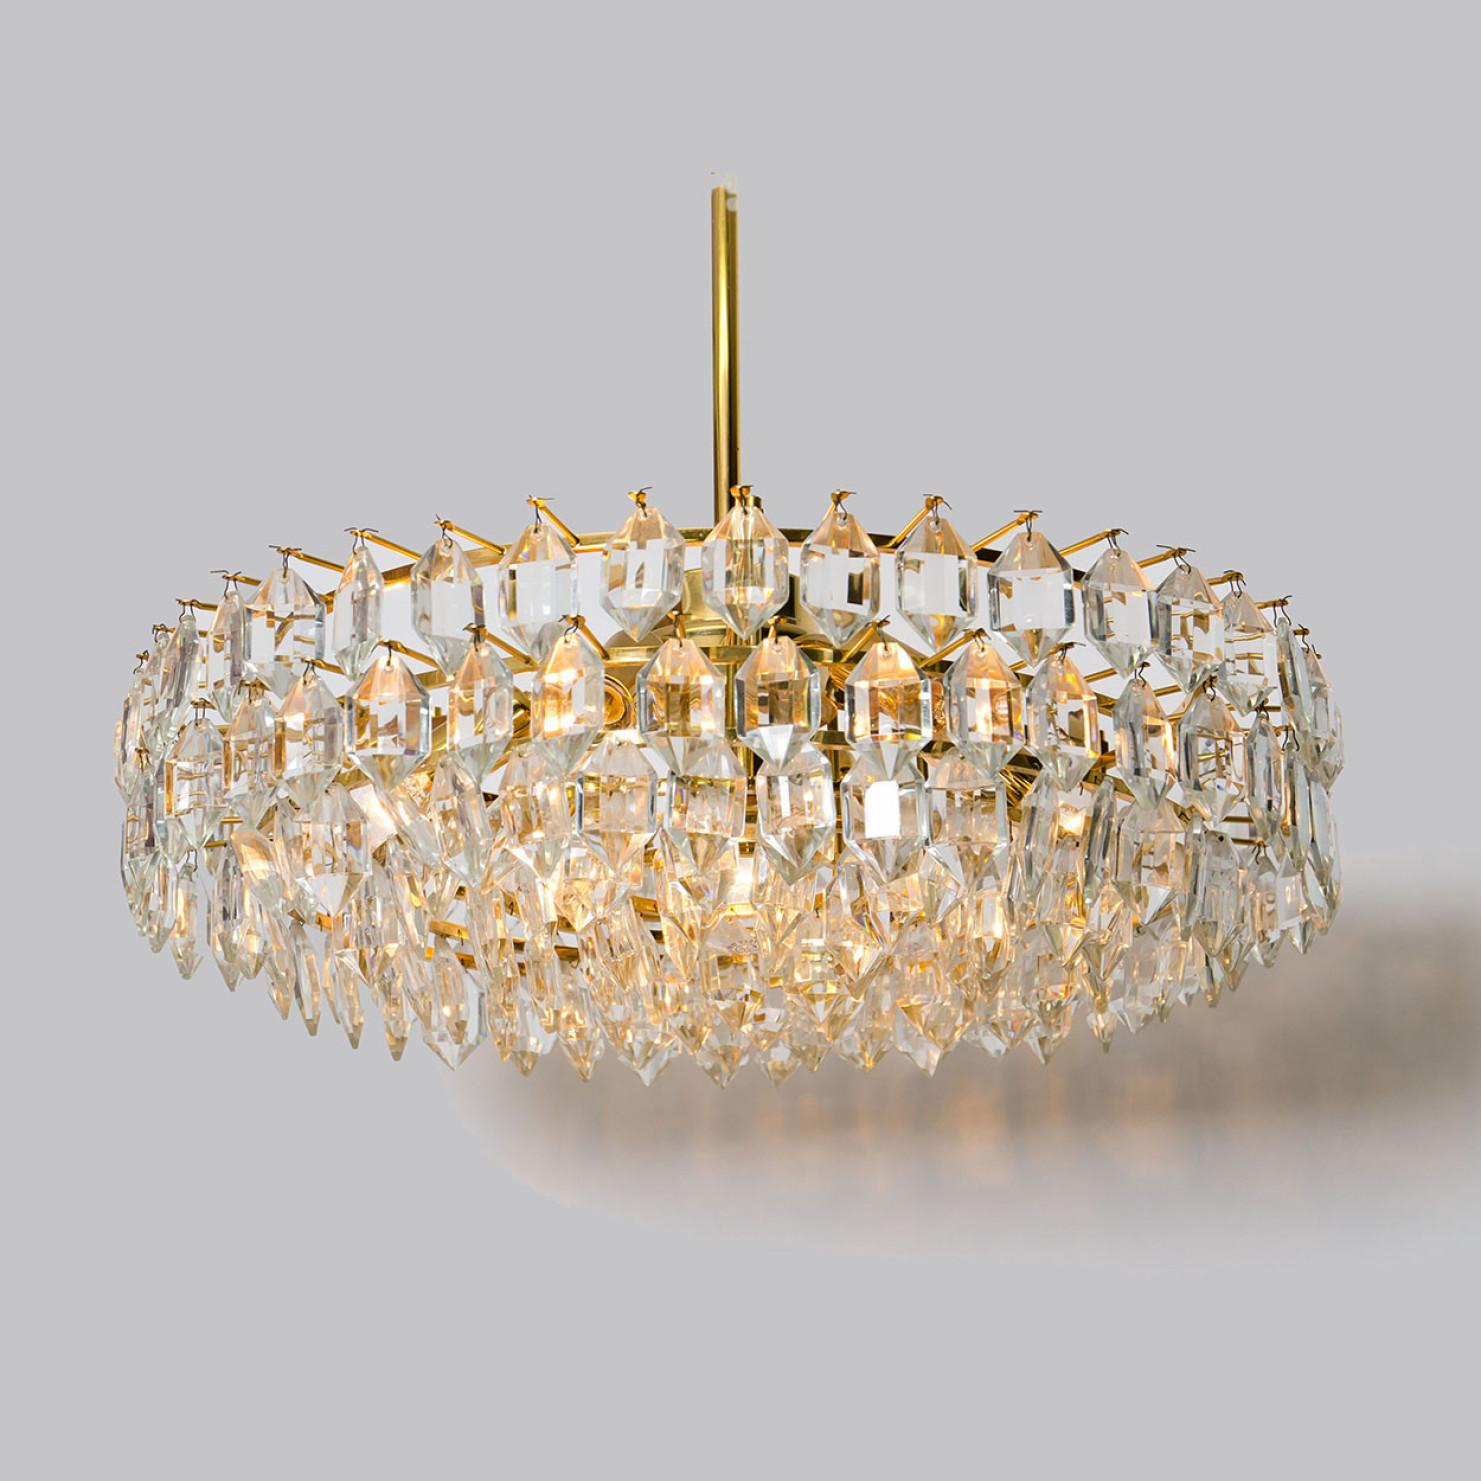 Pair of Bakalowits & Sohne Chandeliers, Brass and Crystal Glass, Austria, 1960s For Sale 5